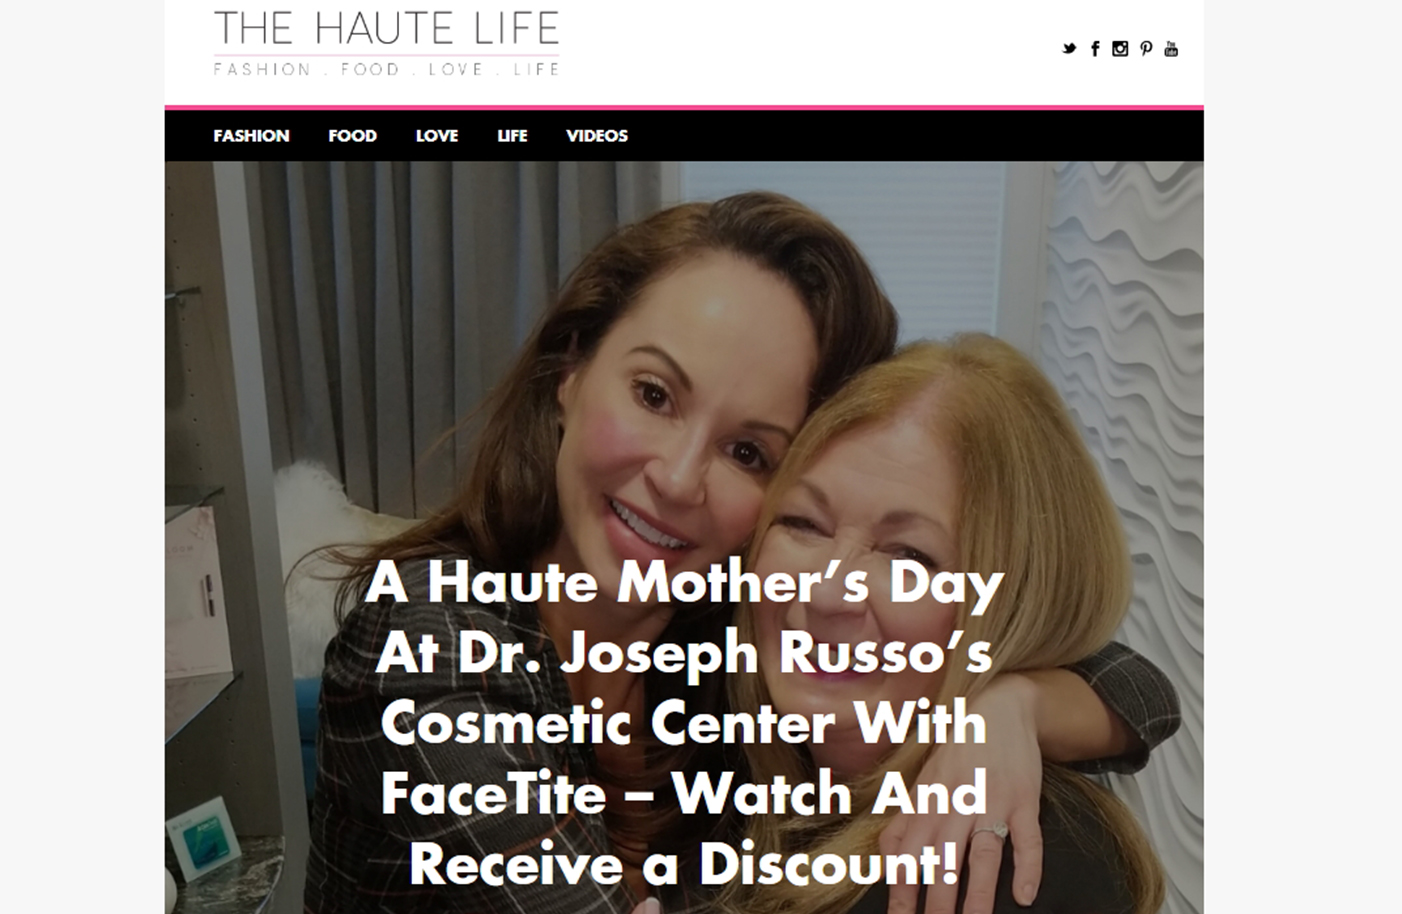 A Haute Mother’s Day At Dr. Joseph Russo’s Cosmetic Center With FaceTite